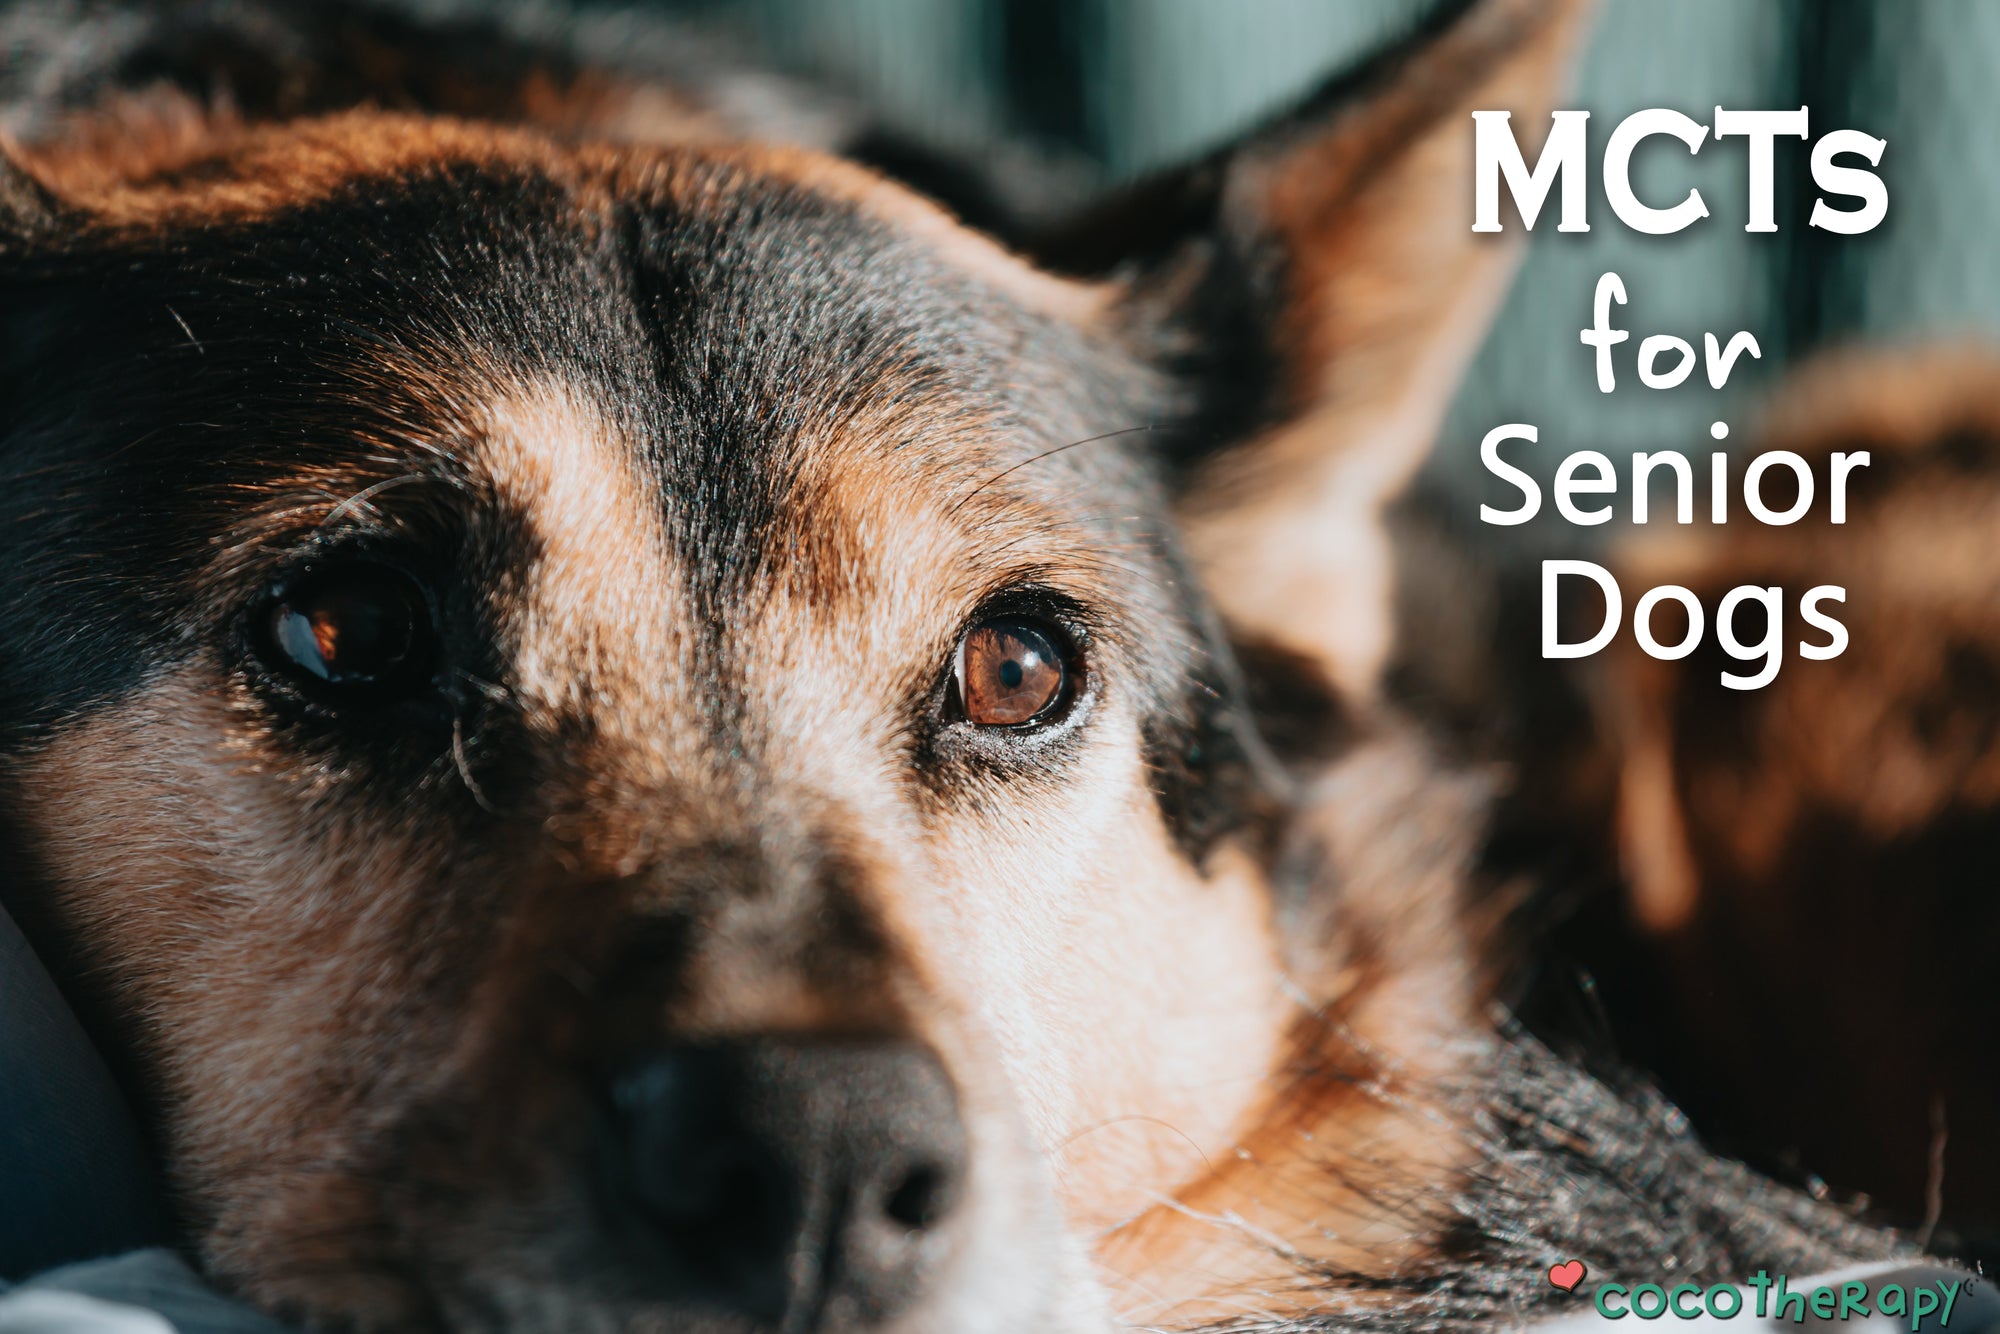 Is Your Senior Dog Showing Signs of Cognitive Decline? How Medium-Chain Triglycerides Help.